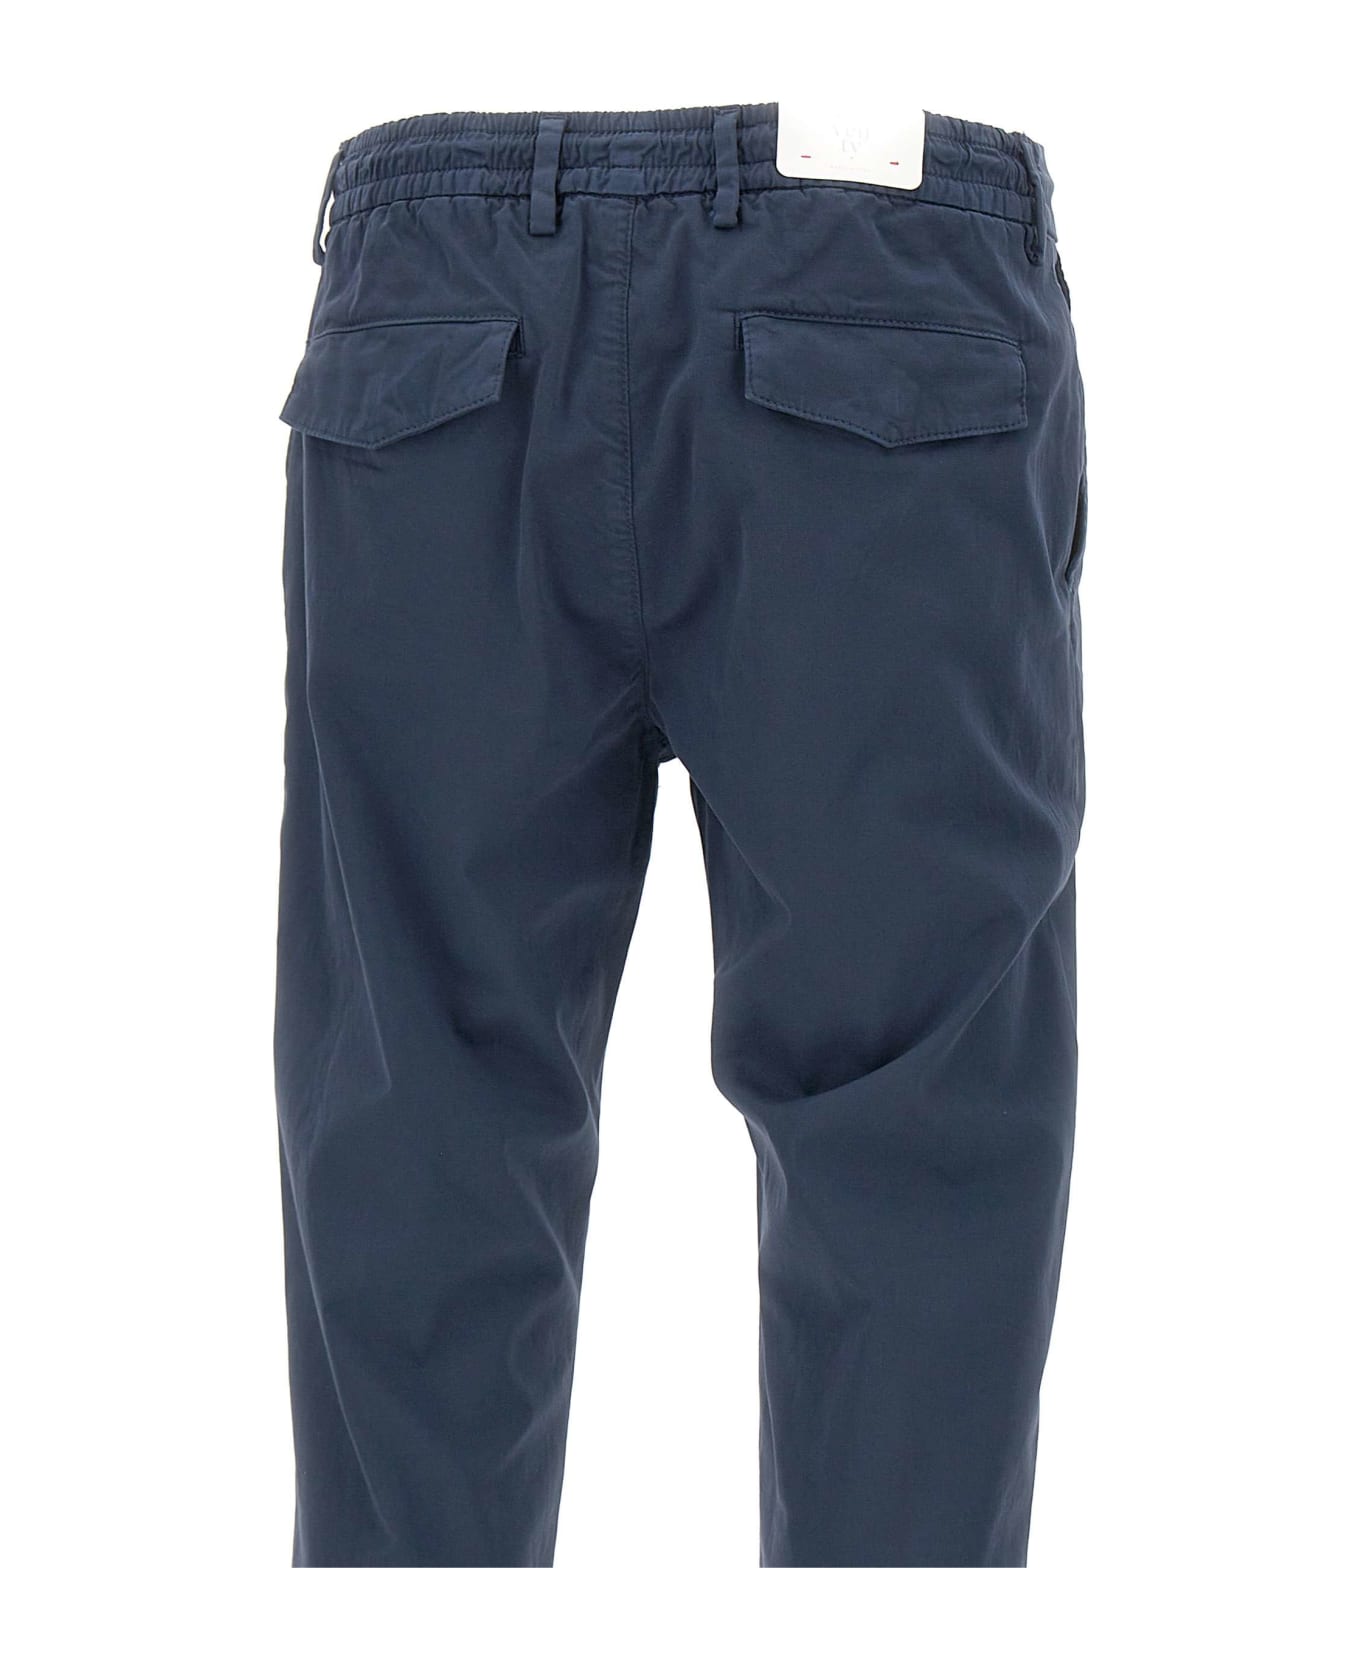 Eleventy Stretch Cotton Trousers - BLUE ボトムス